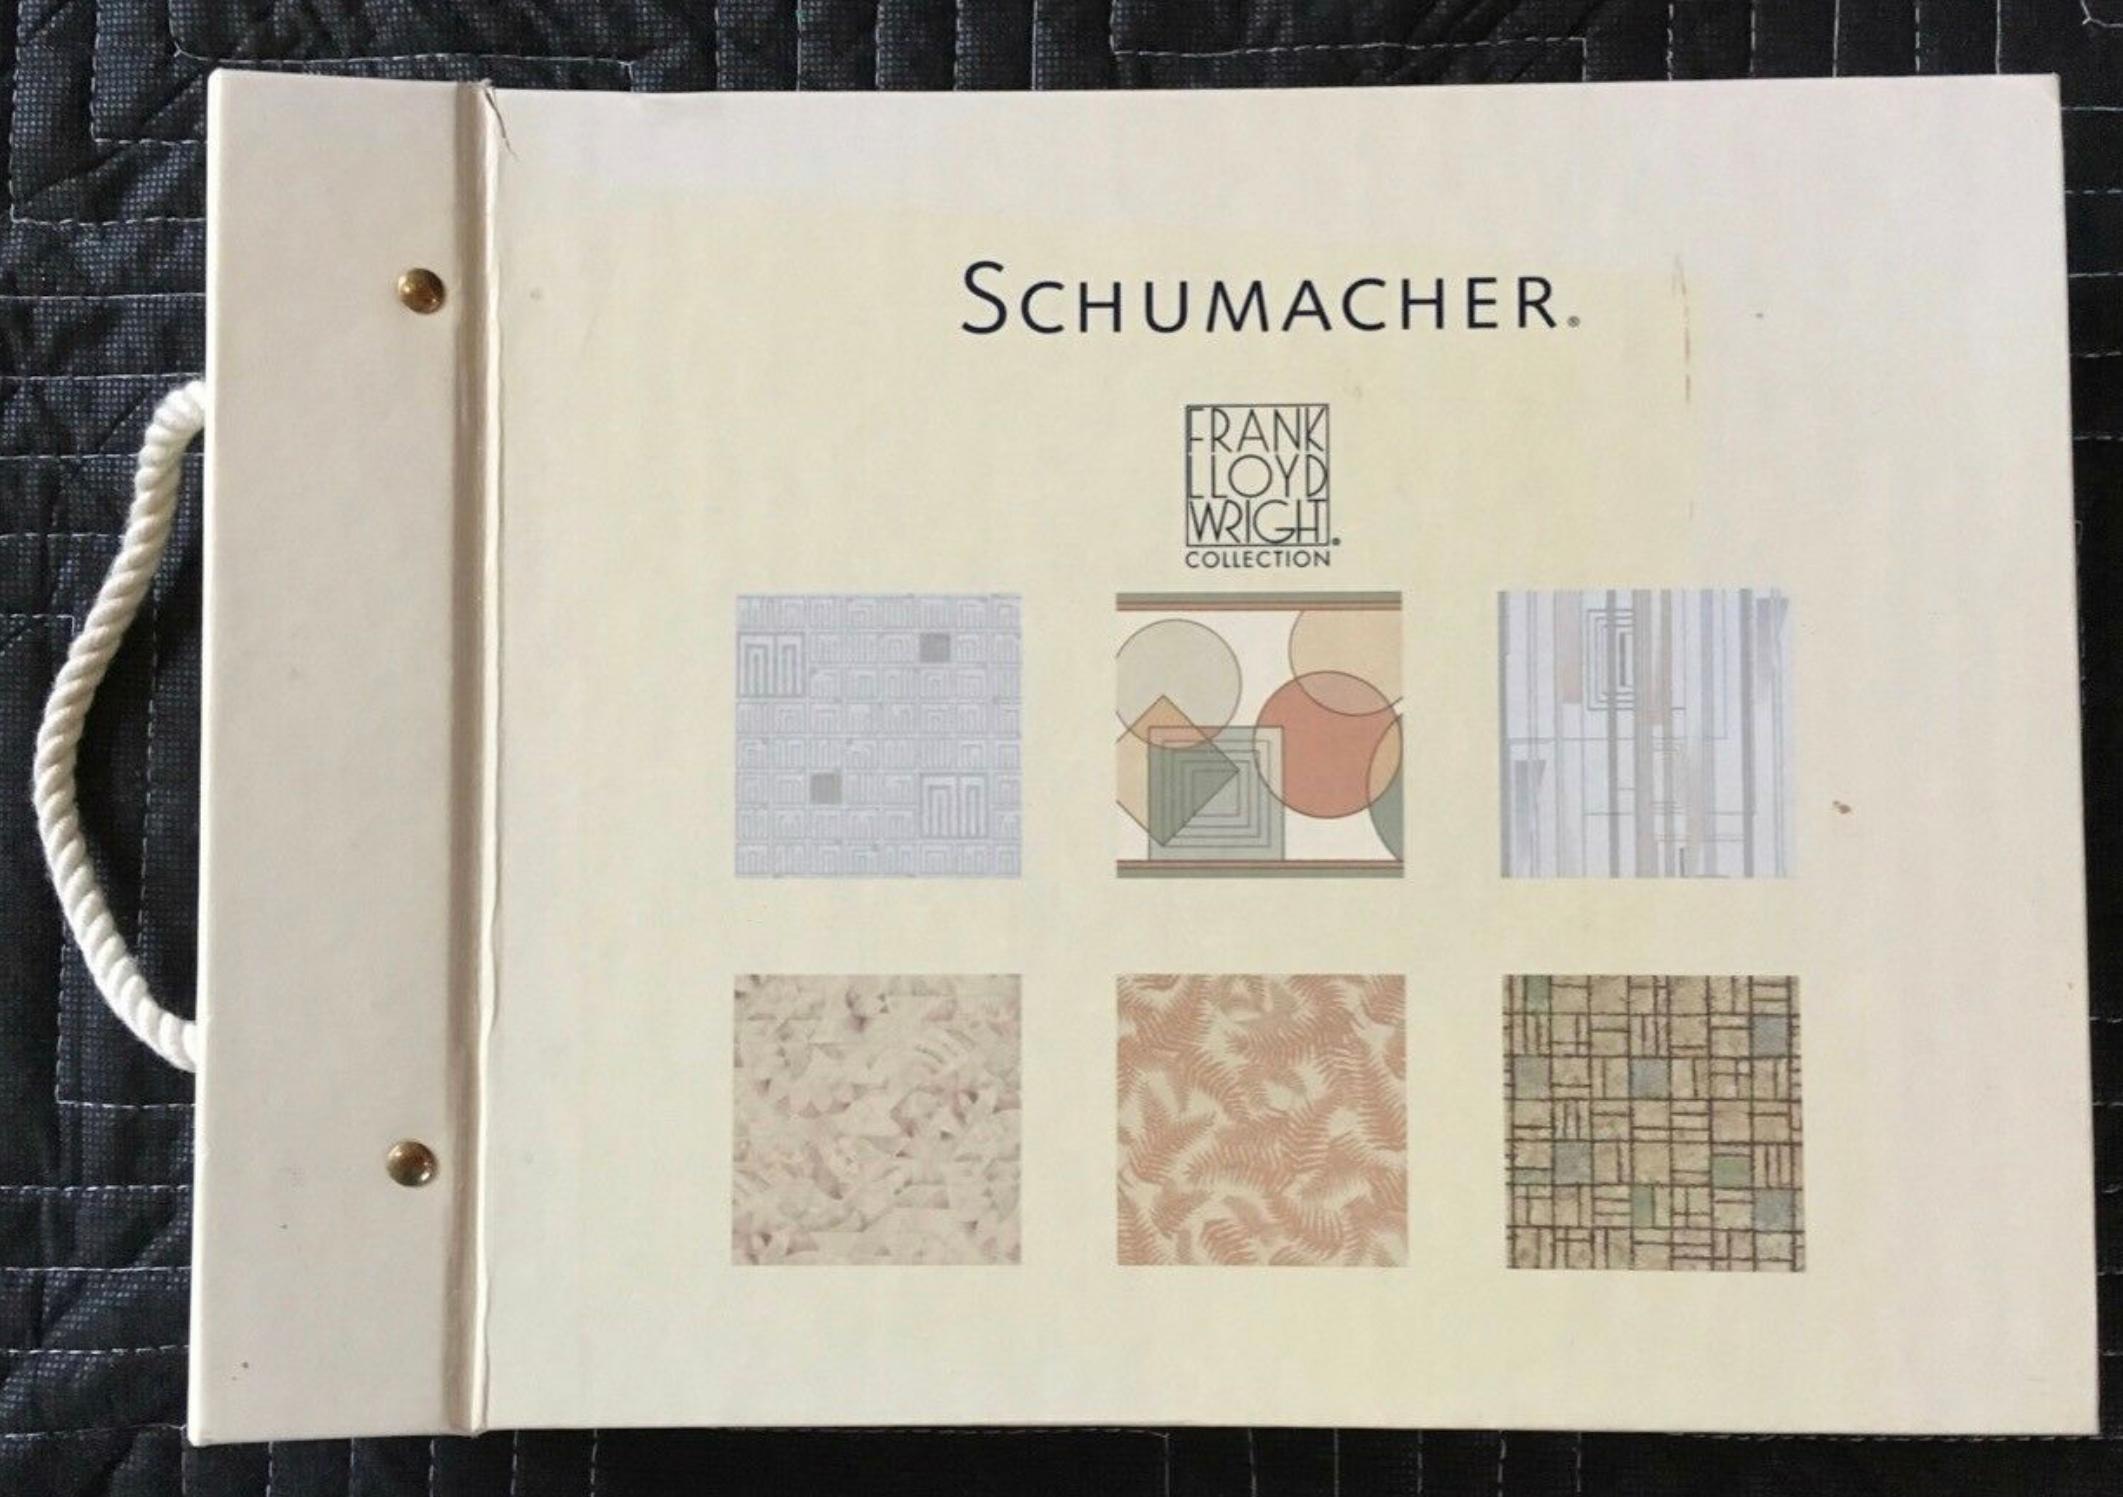 Frank Lloyd Wright Schumacher wallcovering books catalogue reference 1986-1999 - ‘Prints inspired by nature’
Anyone with an ounce of interest in architecture knows Frank Lloyd Wright; ask someone to name a few of his projects, and you'll likely hear